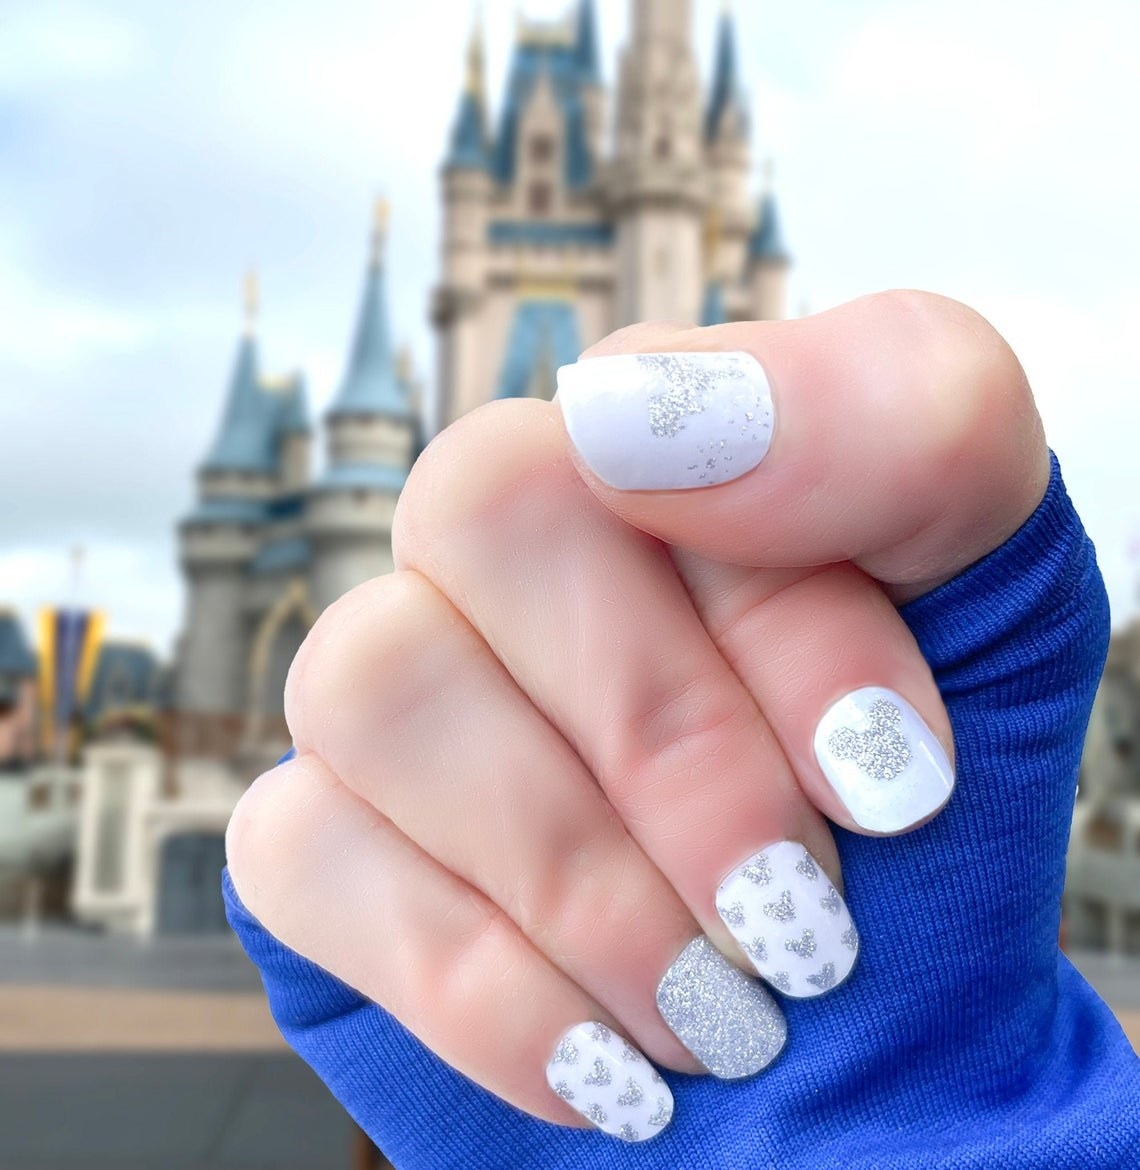 nails with glittery mickey mouse patterns